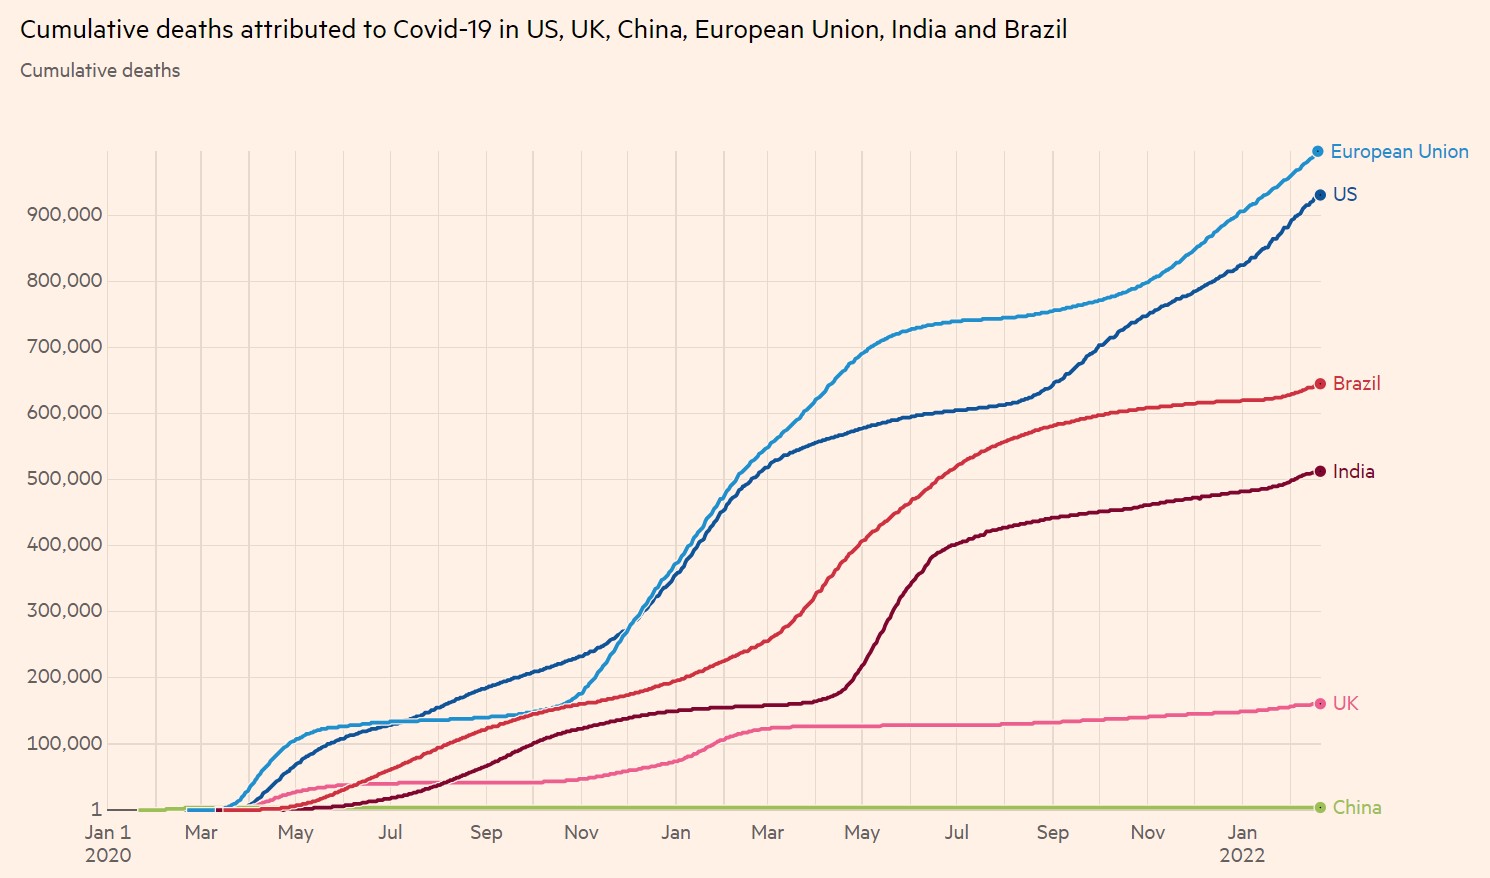 Cumulative deaths attributed to Covid-19 raw numbers US UK China EU India Brazil 1-1-2020 to 20-2-2022 - enlarge